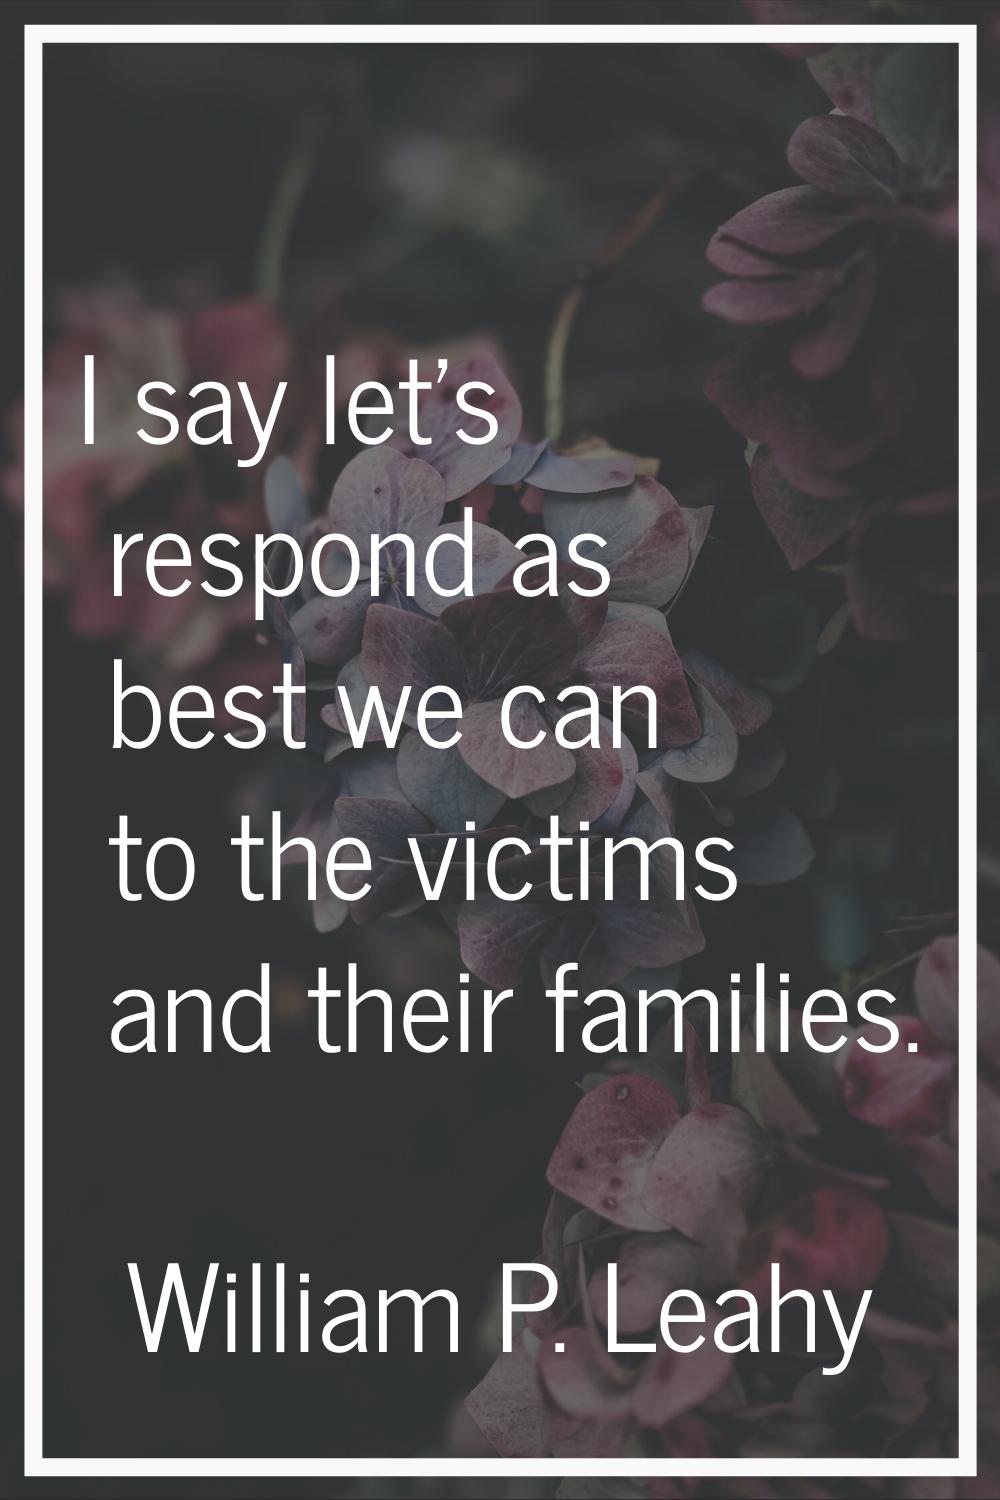 I say let's respond as best we can to the victims and their families.